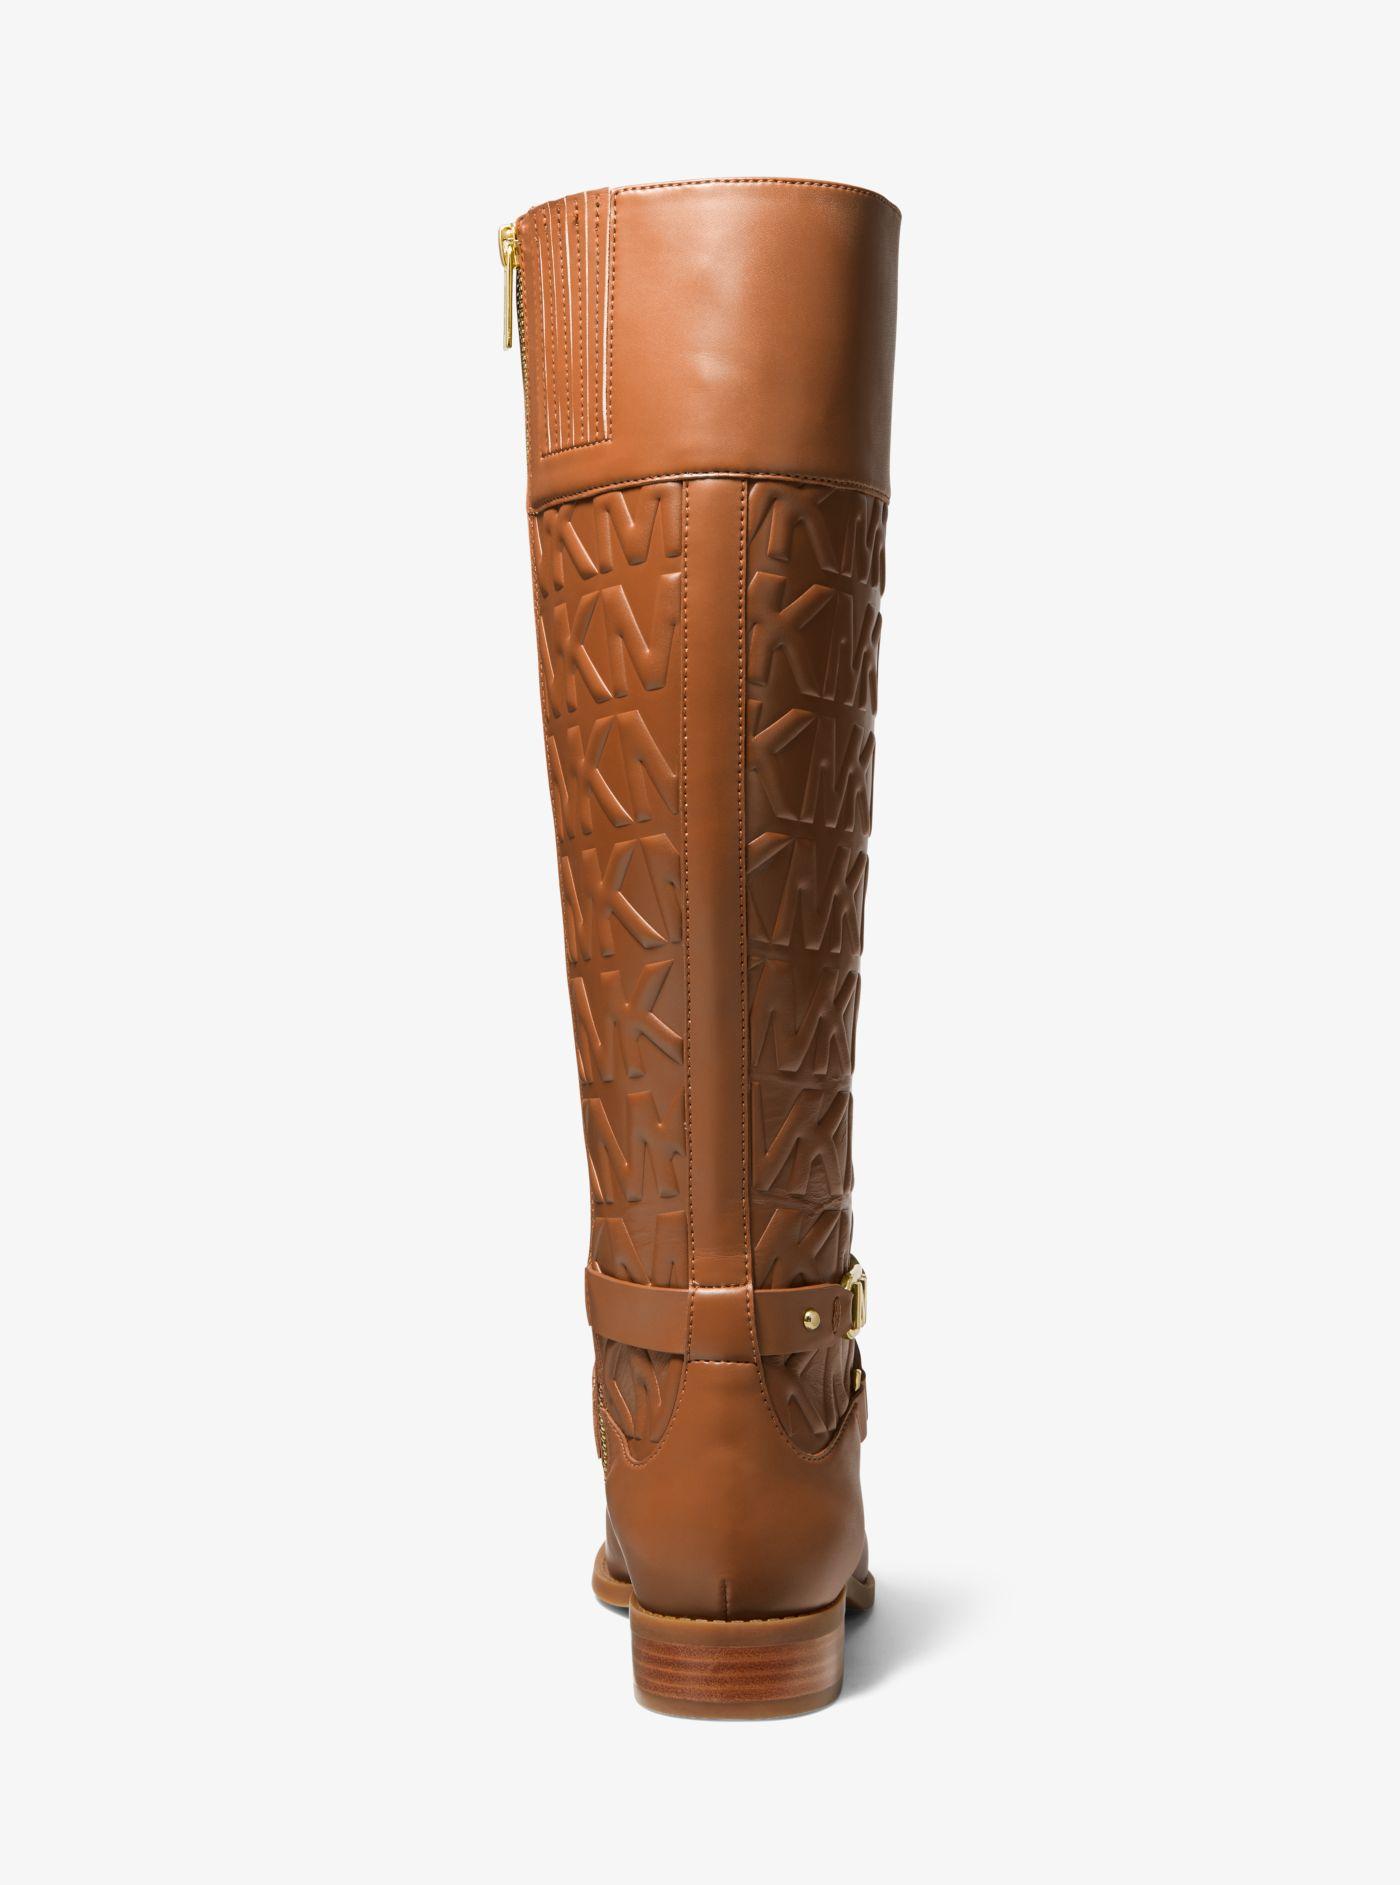 Michael Kors Kincaid Embossed Riding Boot in Brown - Lyst